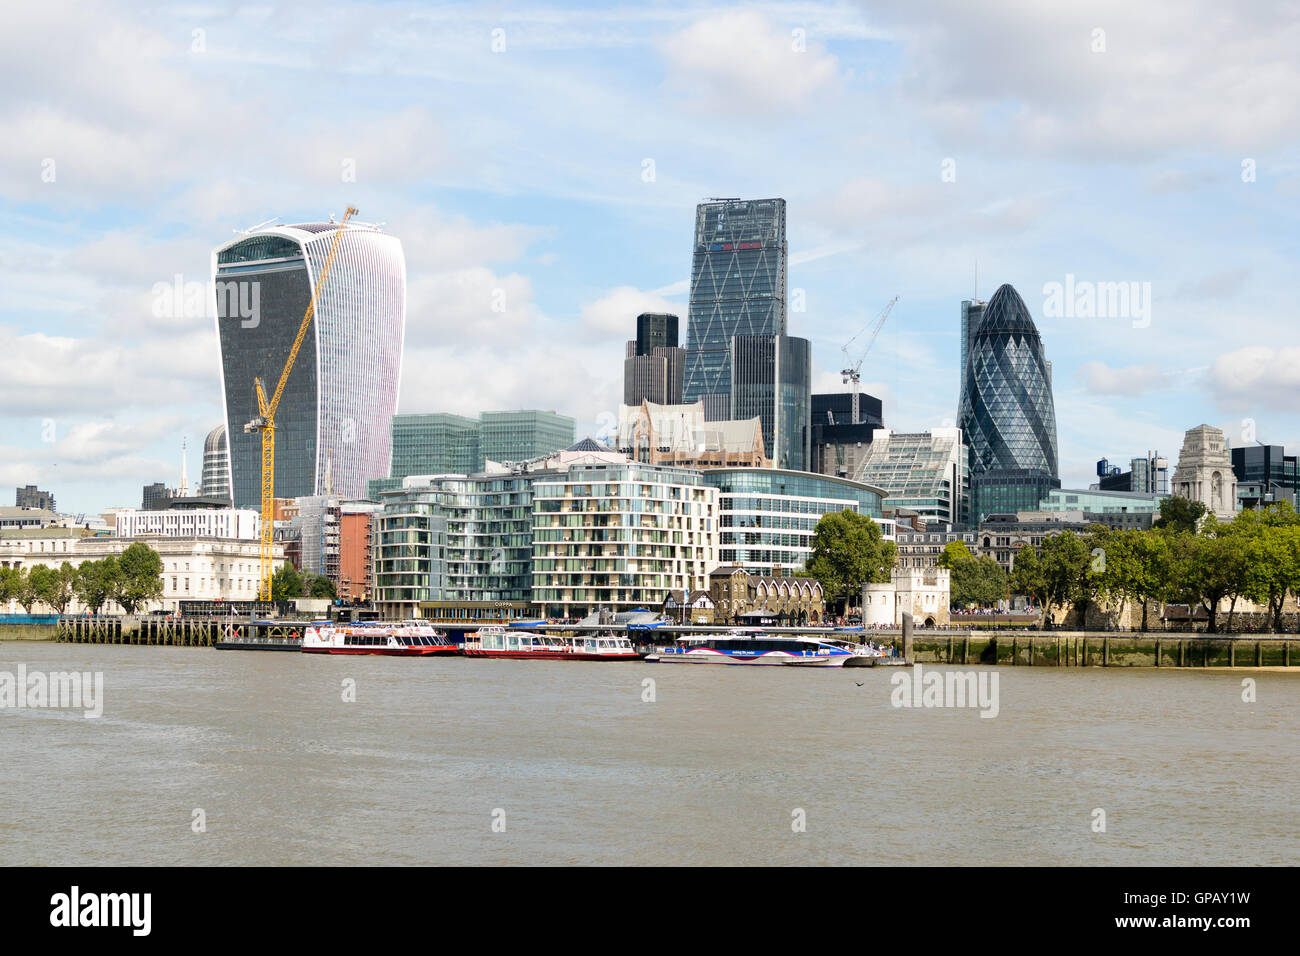 London, UK - 31 August 2016: City of London view from the river Thames. International business and banking district. Stock Photo